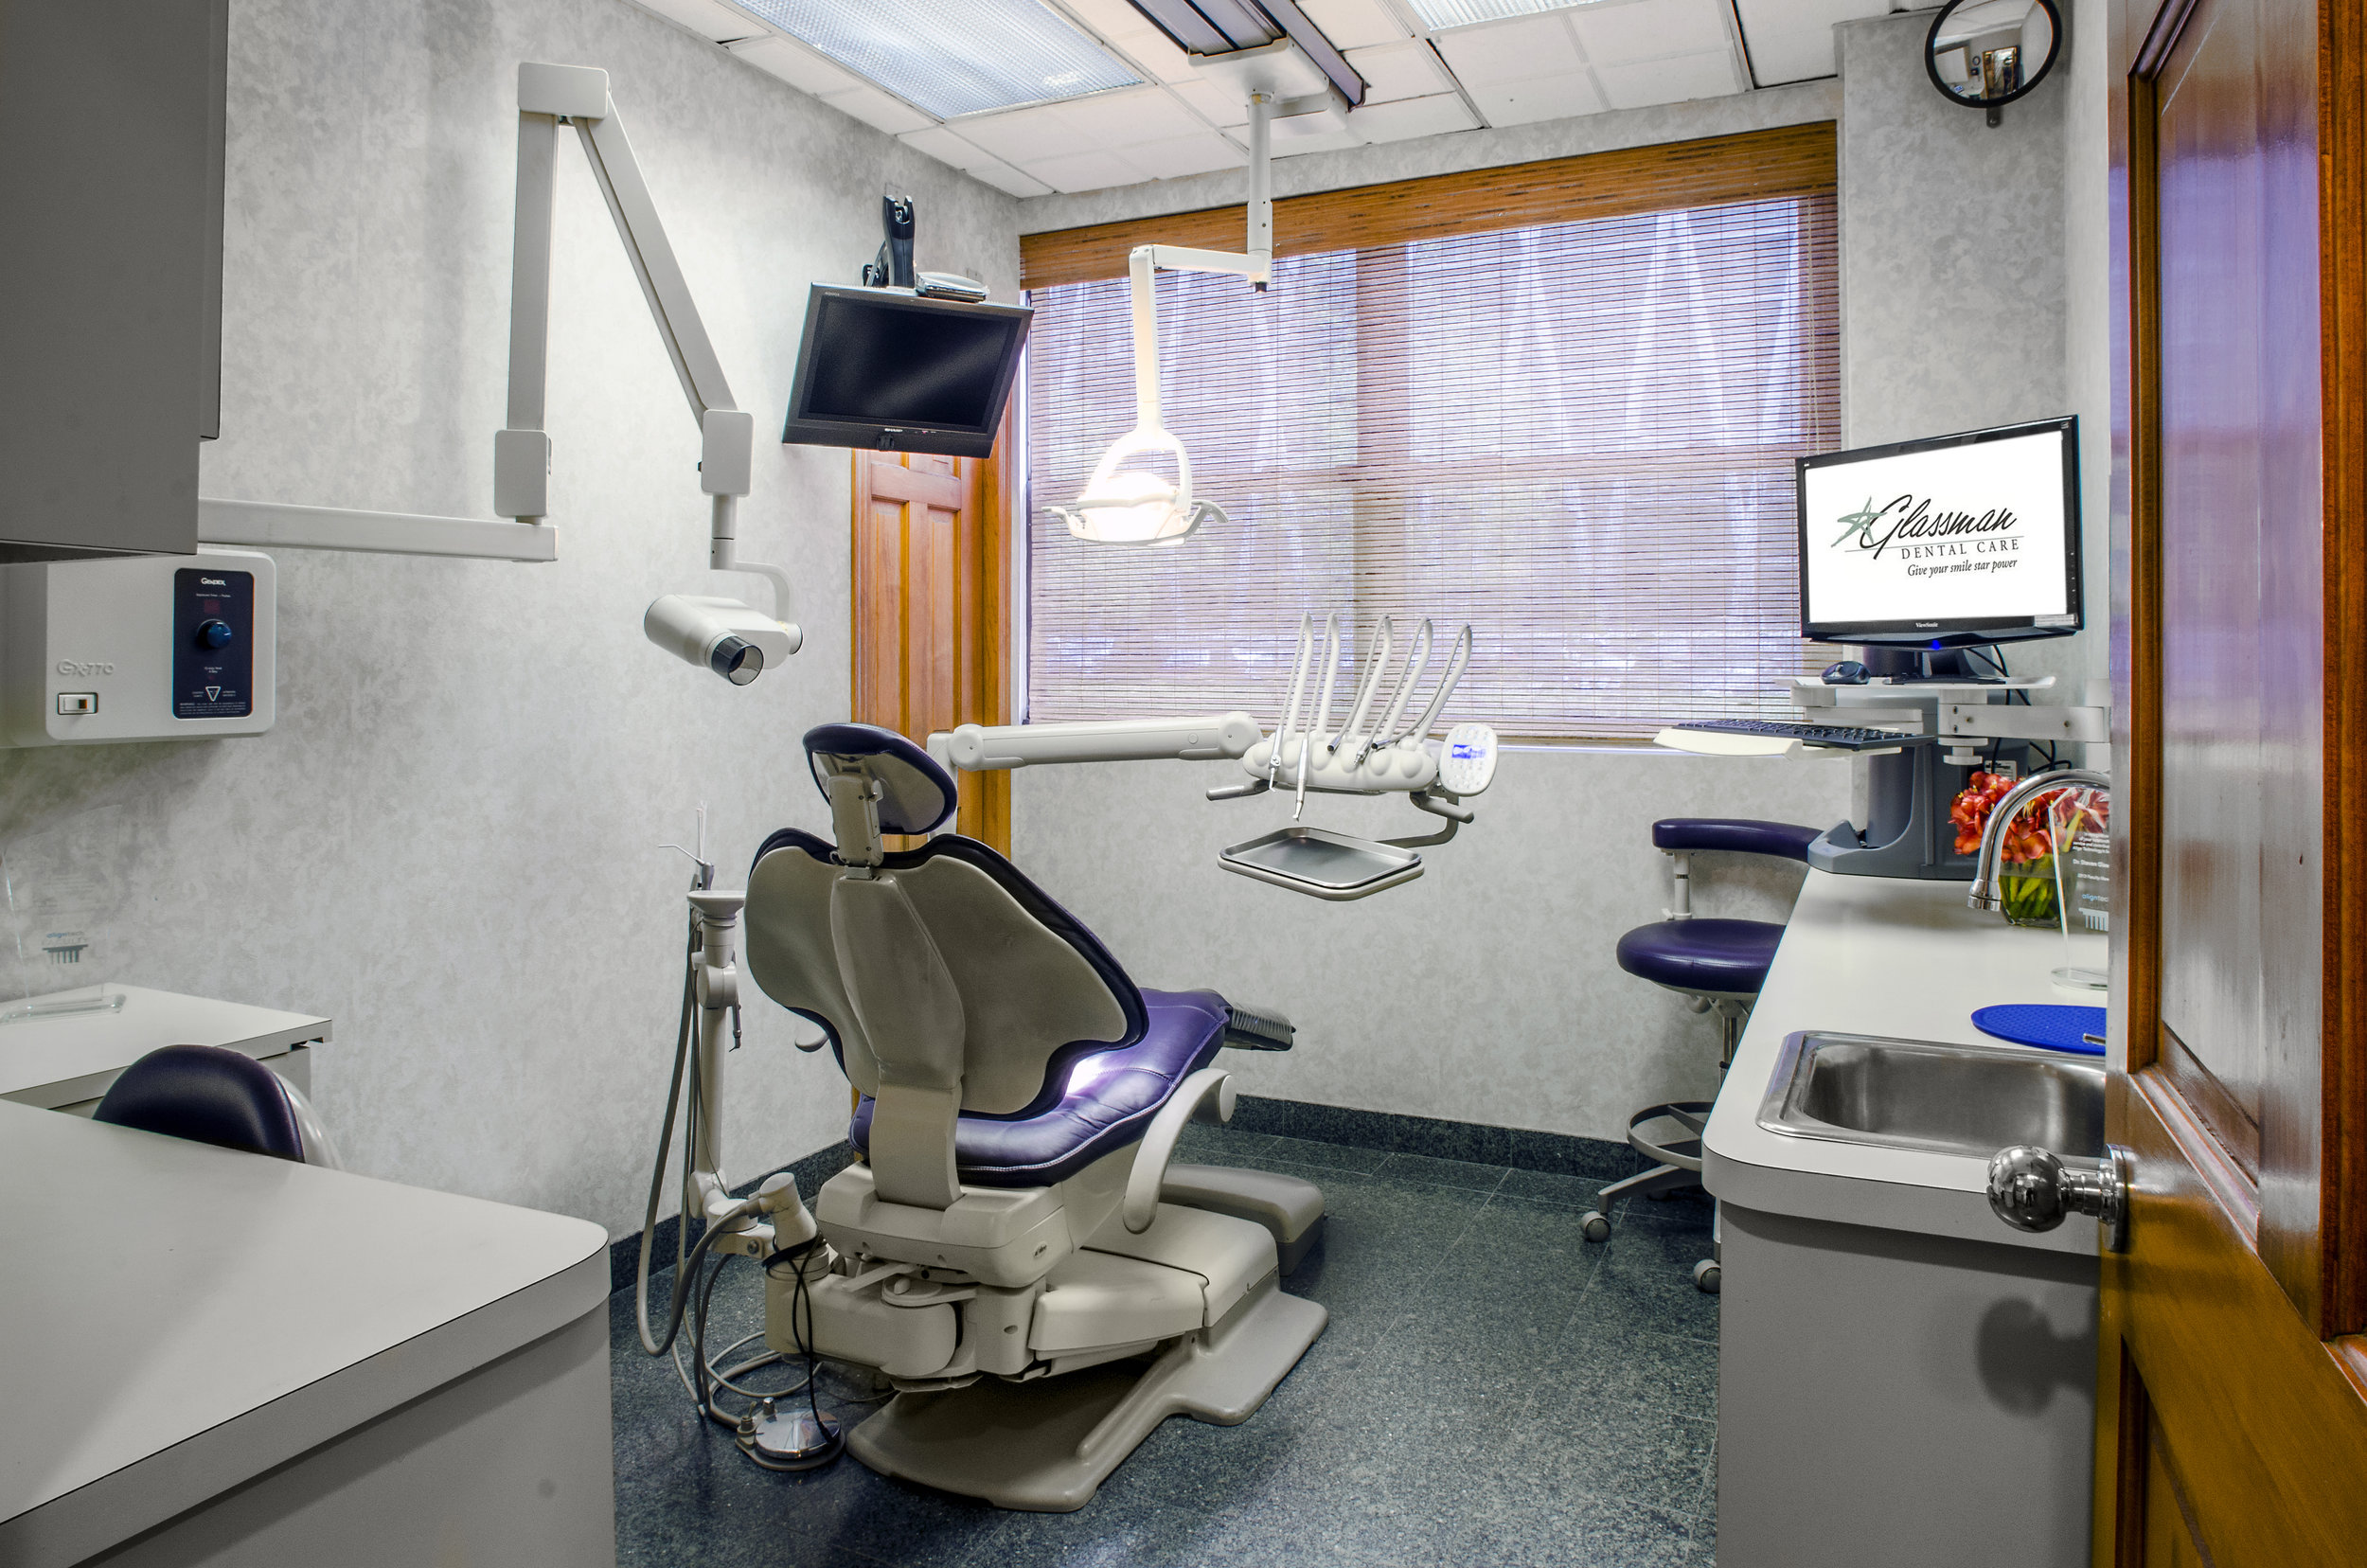 Glassman Dental Care offices 2015 - photo by Andrew Werner, AHW_5915.jpg